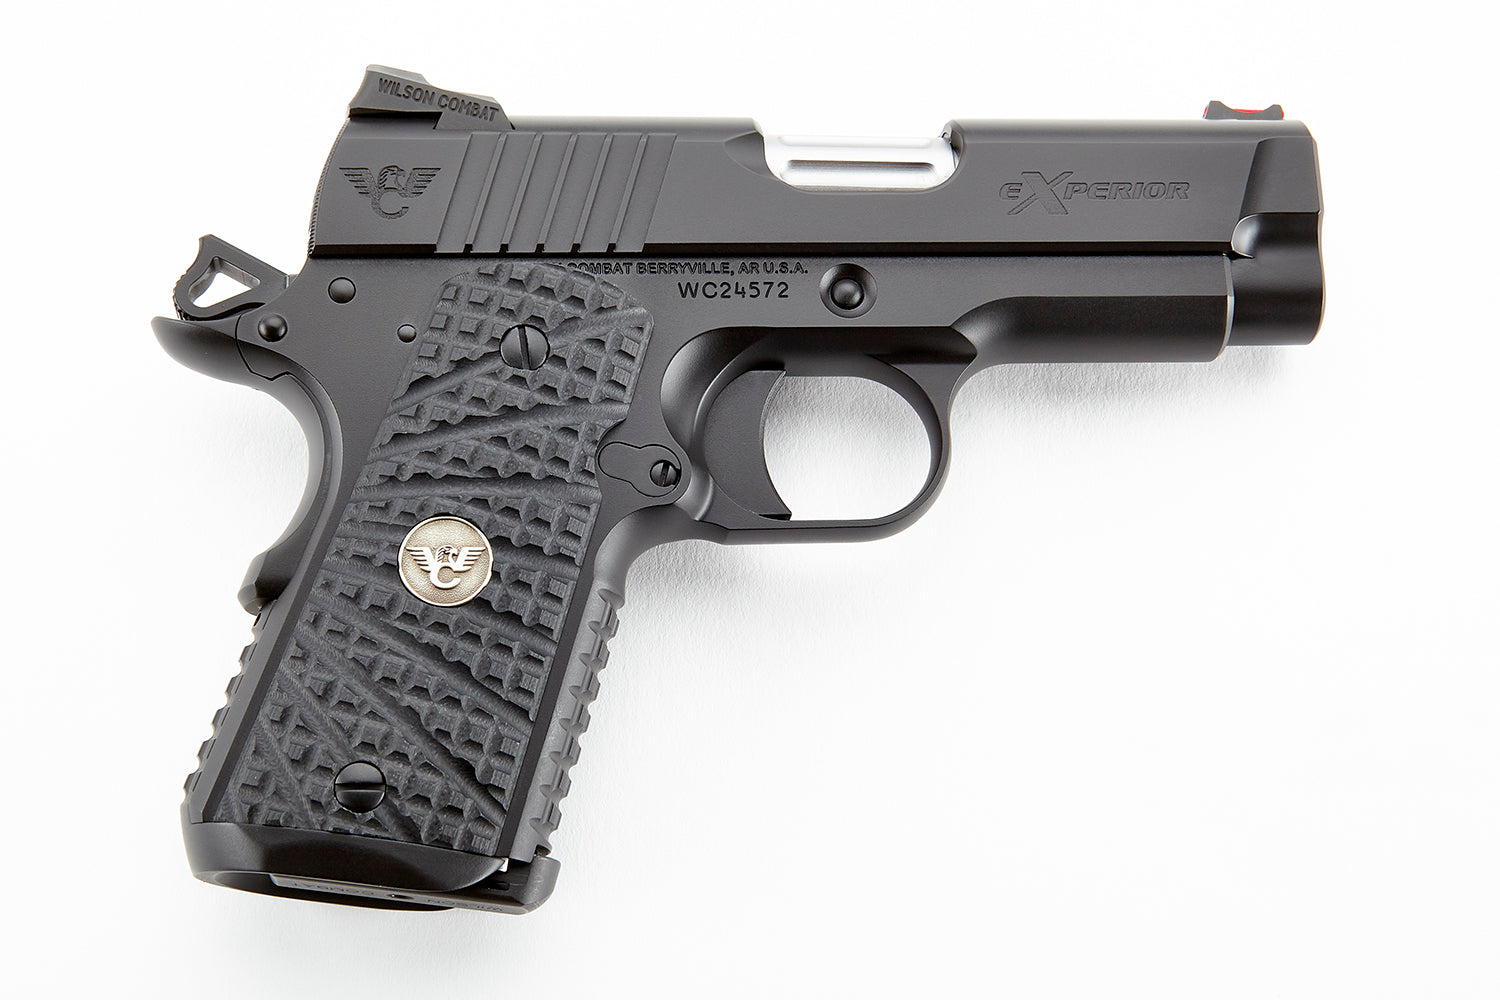 Wilson Combat Experior sub-compact Review: Pros and cons of the Experior sub-compact